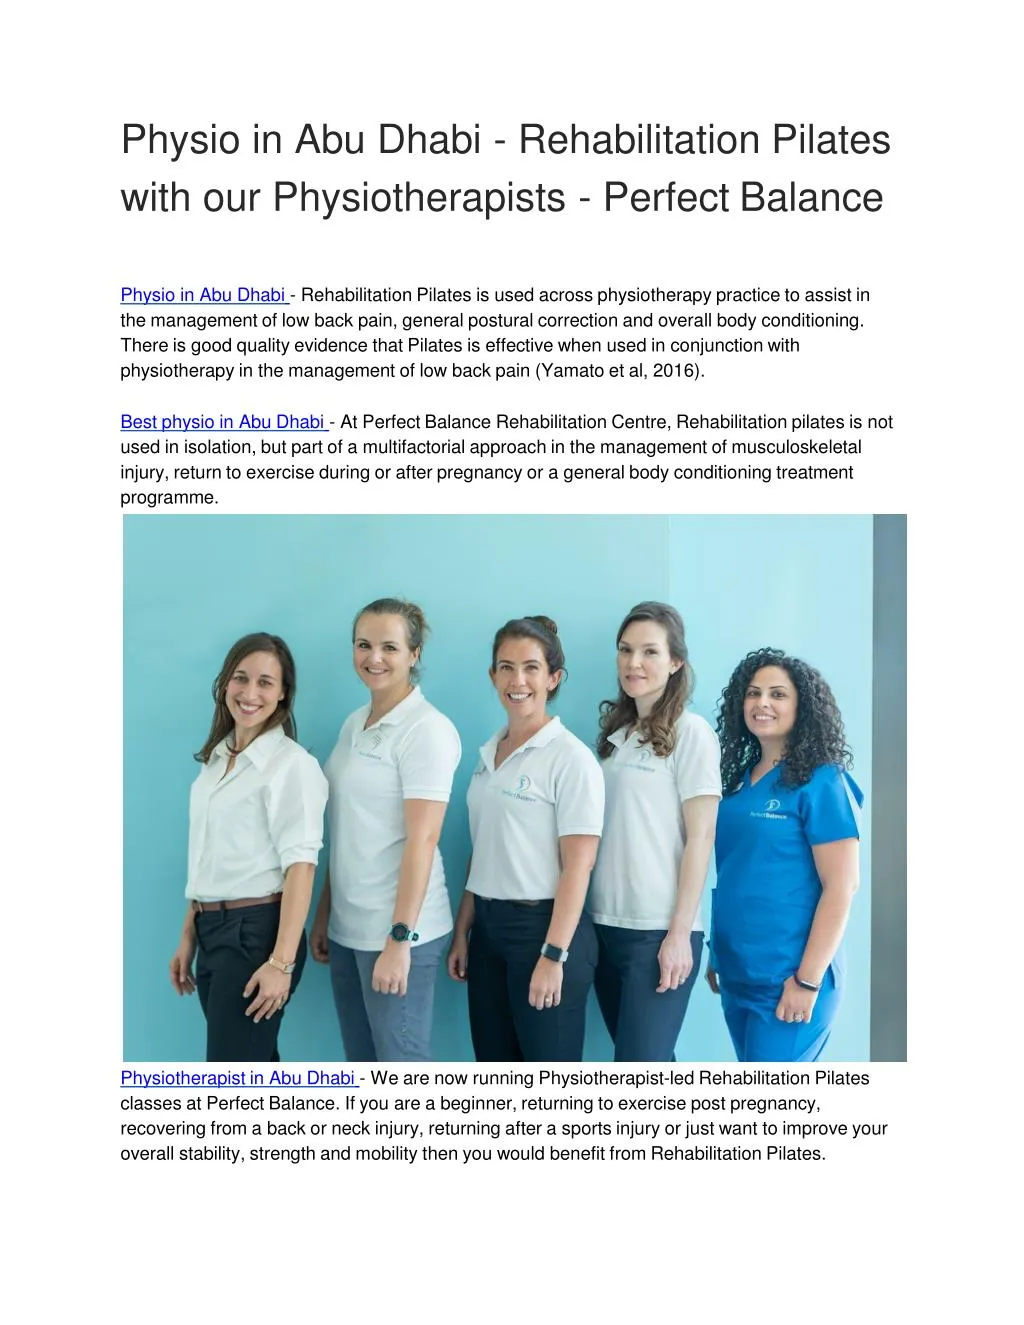 physio in abu dhabi rehabilitation pilates with our physiotherapists perfect balance